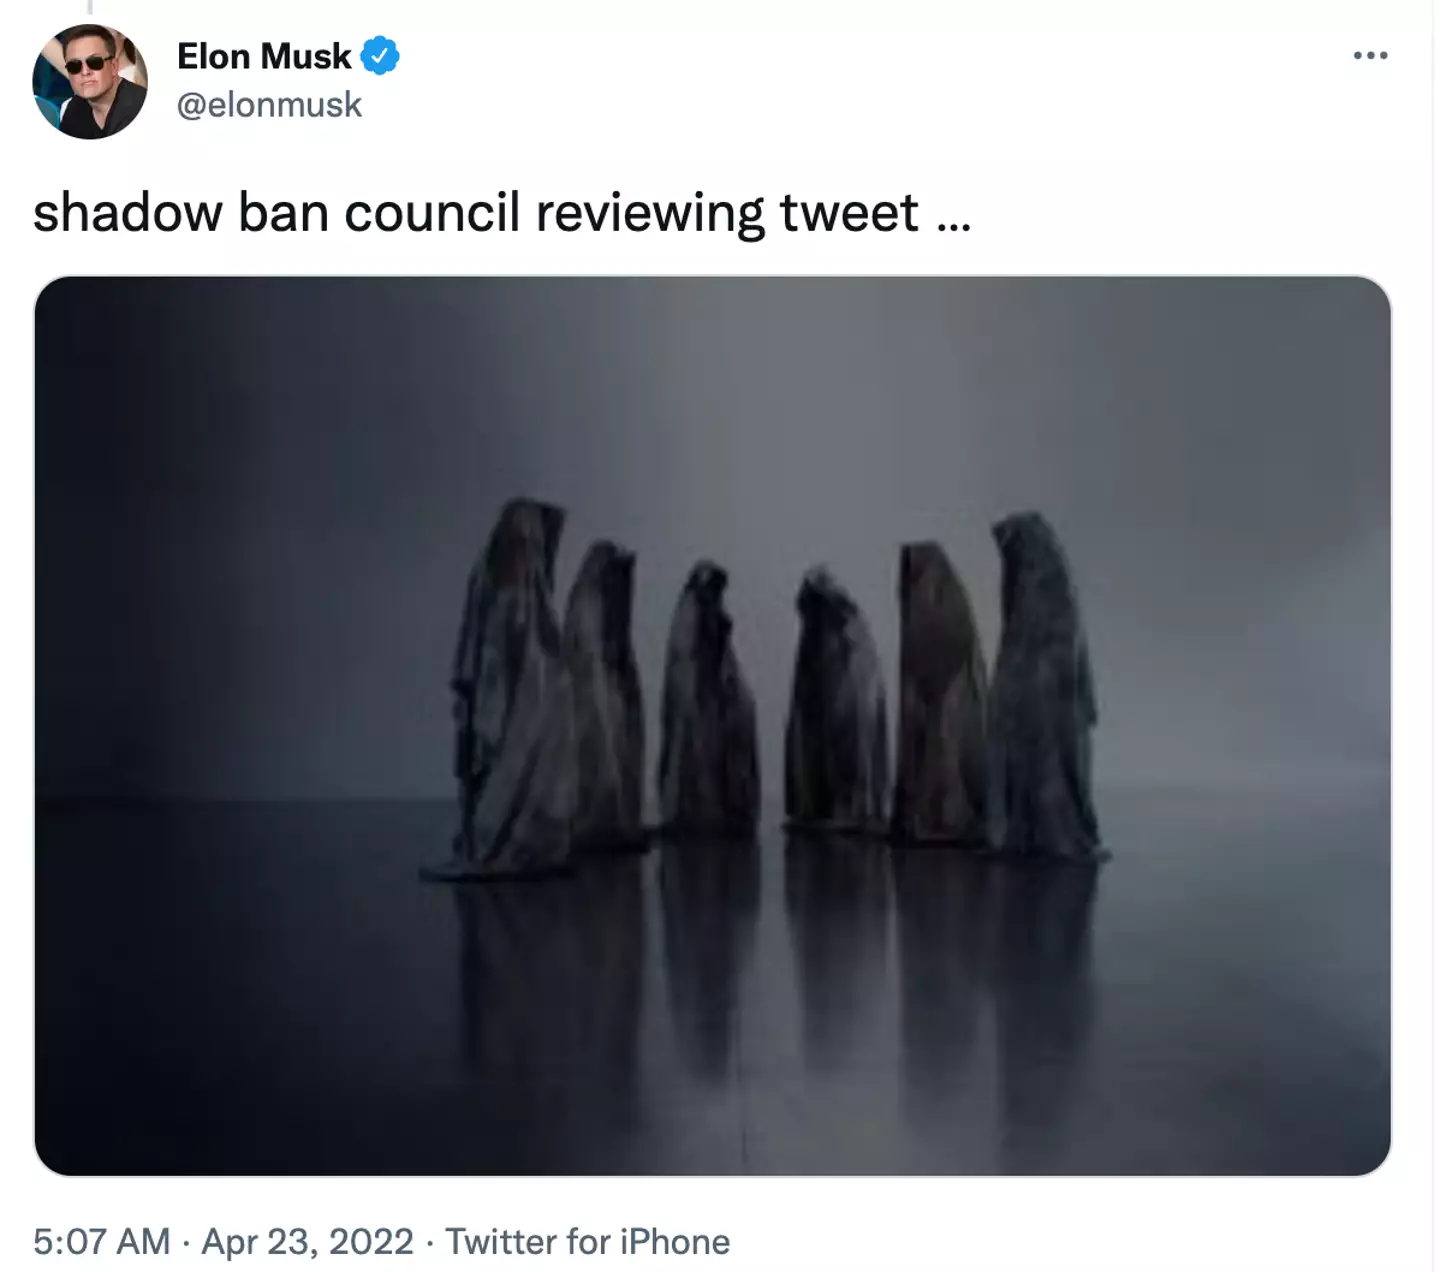 Elon Musk received mixed responses to his post.